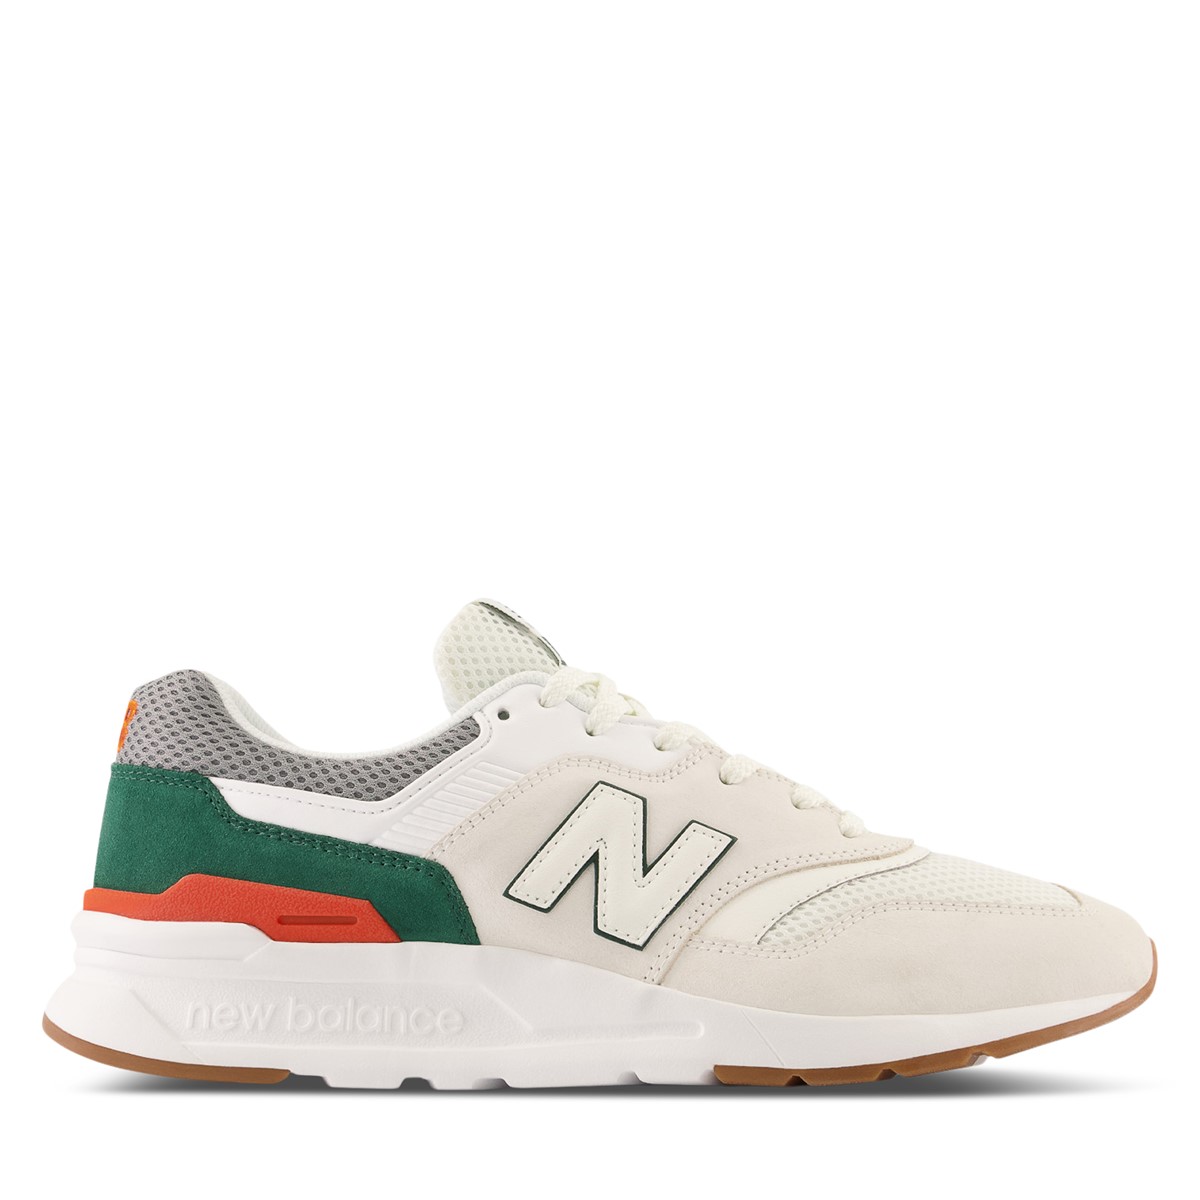 Men's 997H Sneakers in White/Green/Red